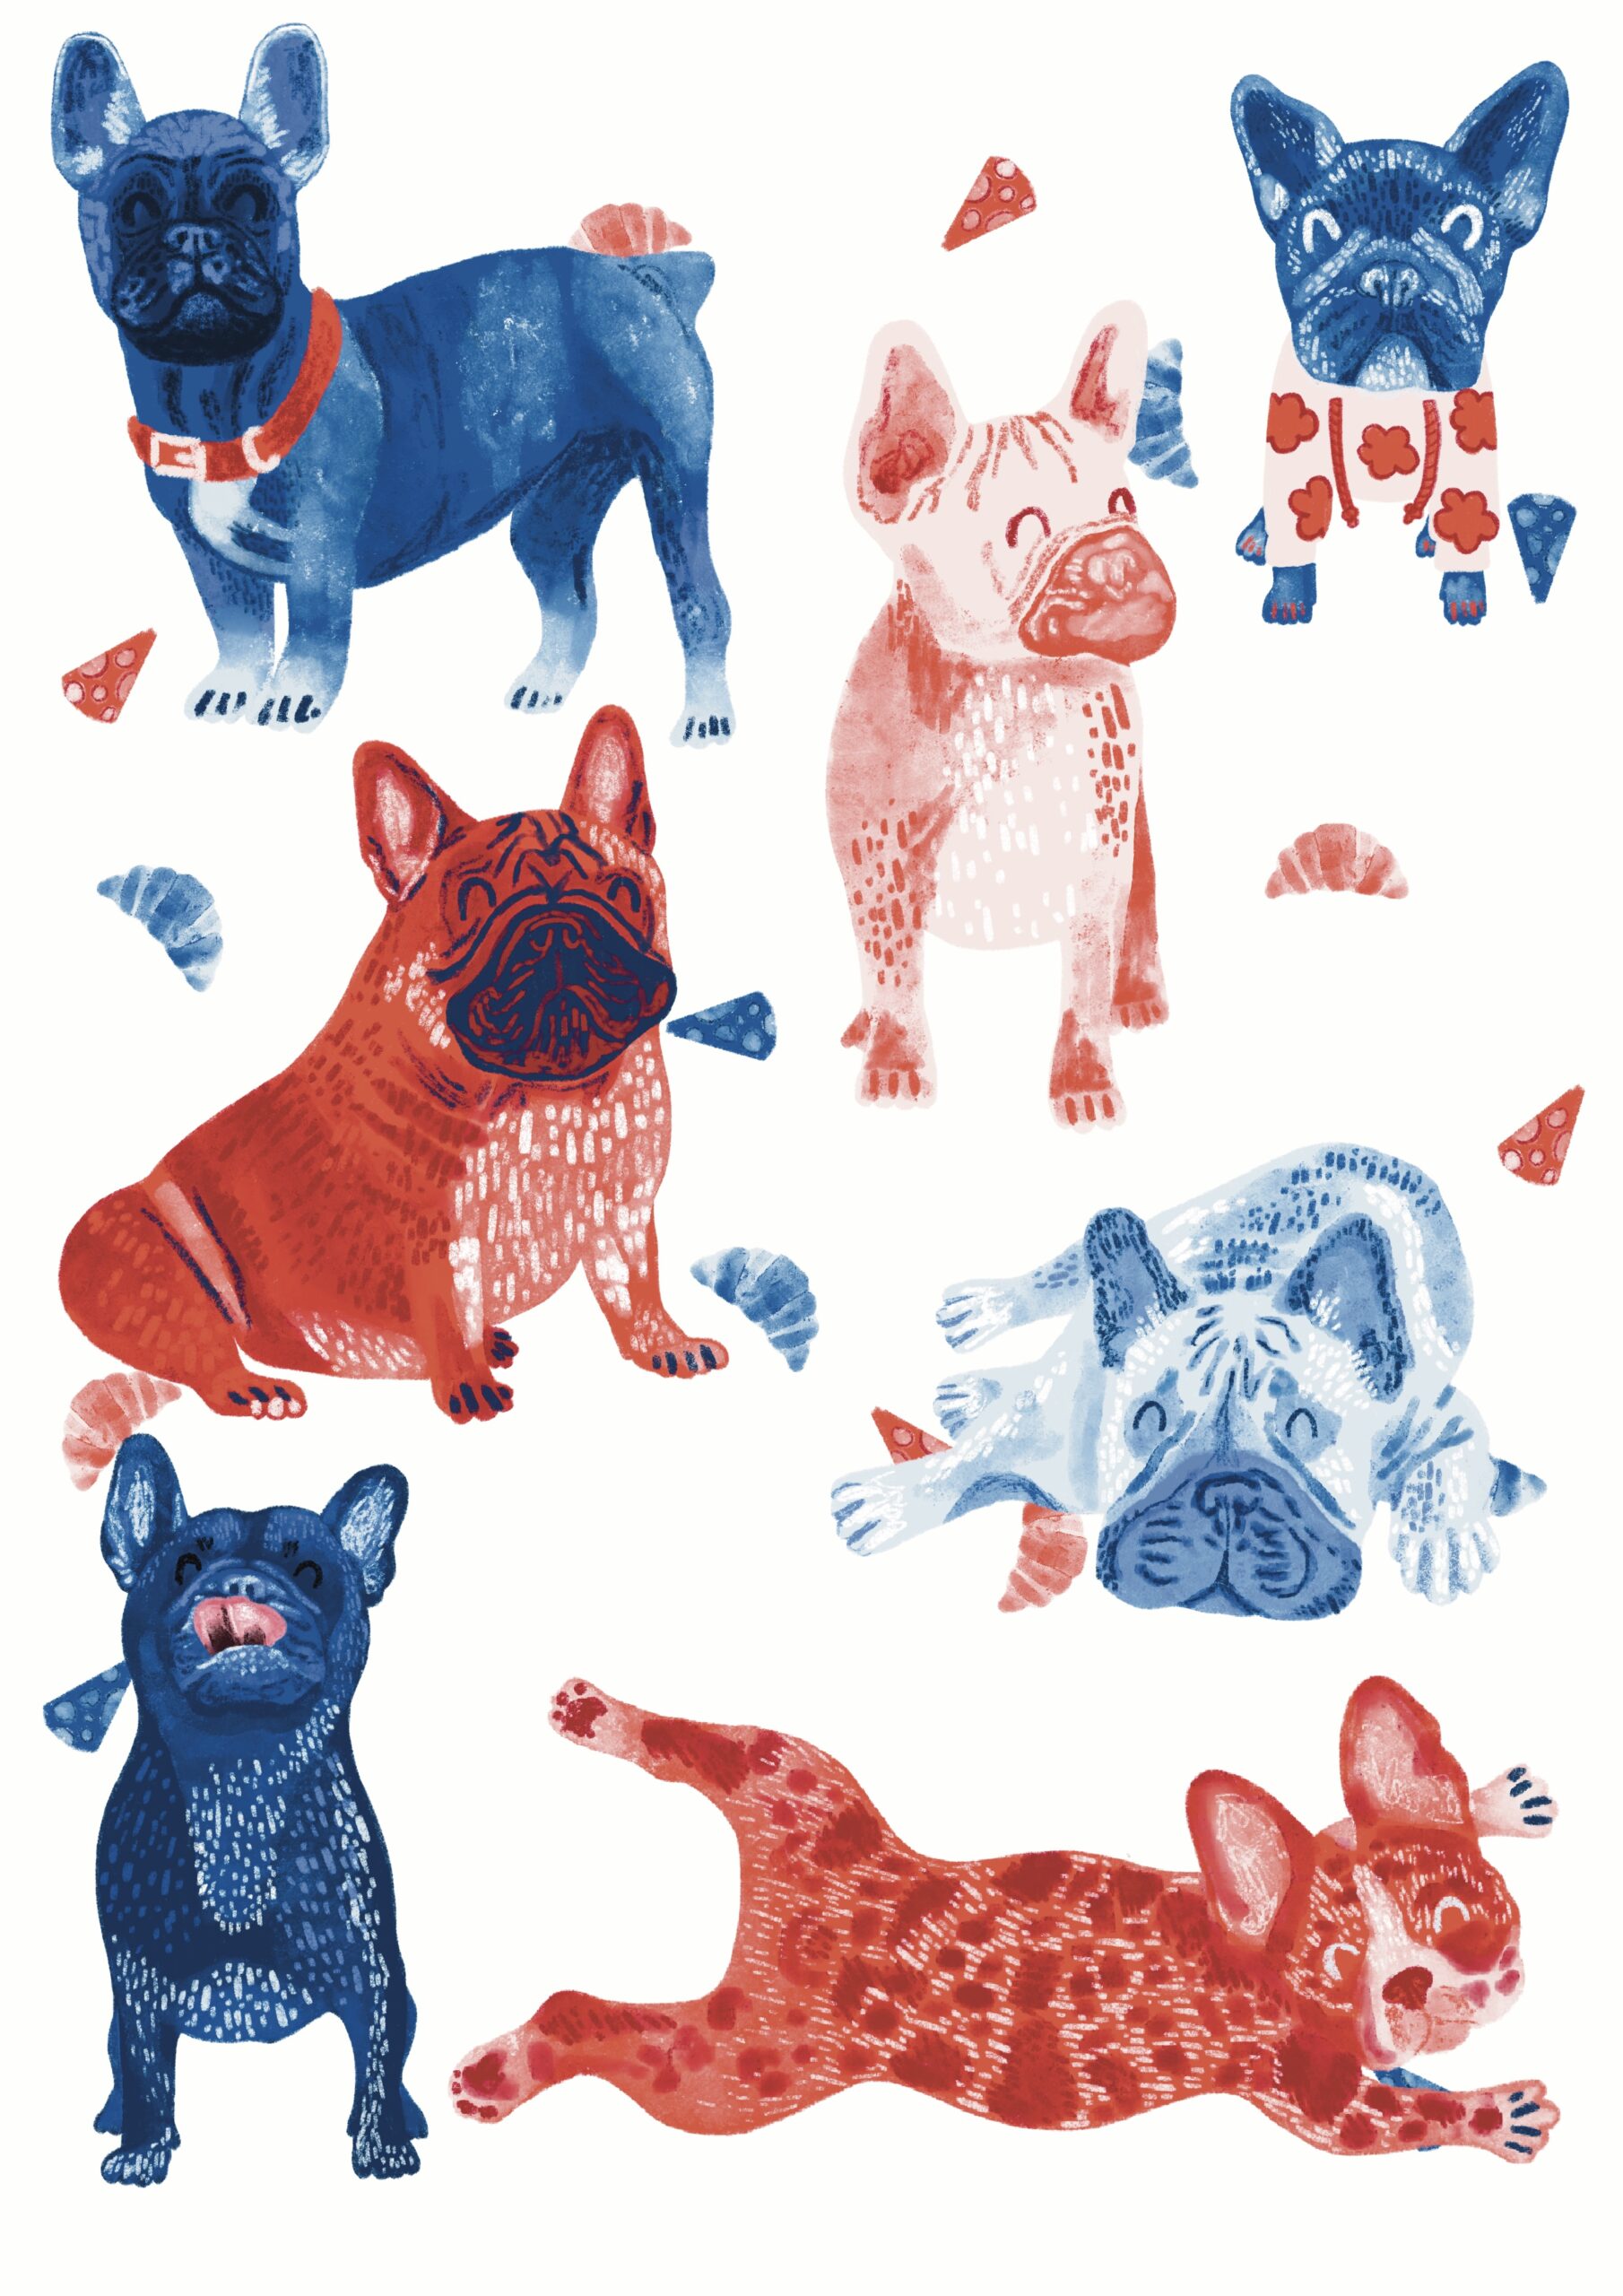 Blue and red illustrated bulldogs in different positions, with tiny croissants and cheese triangles in the background